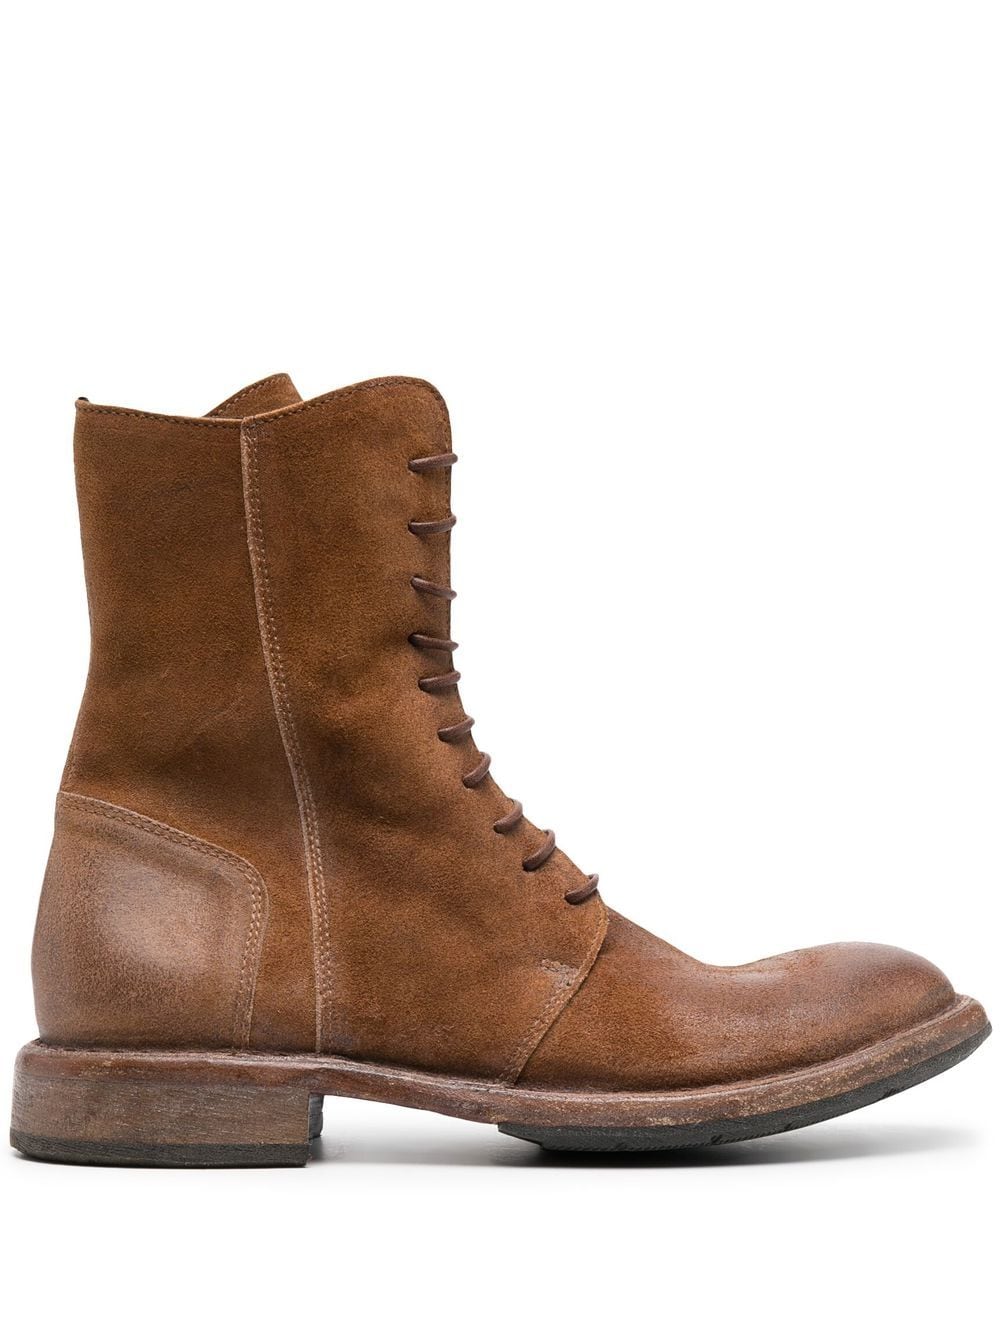 Moma Polacco worn-effect leather boots - Brown von Moma